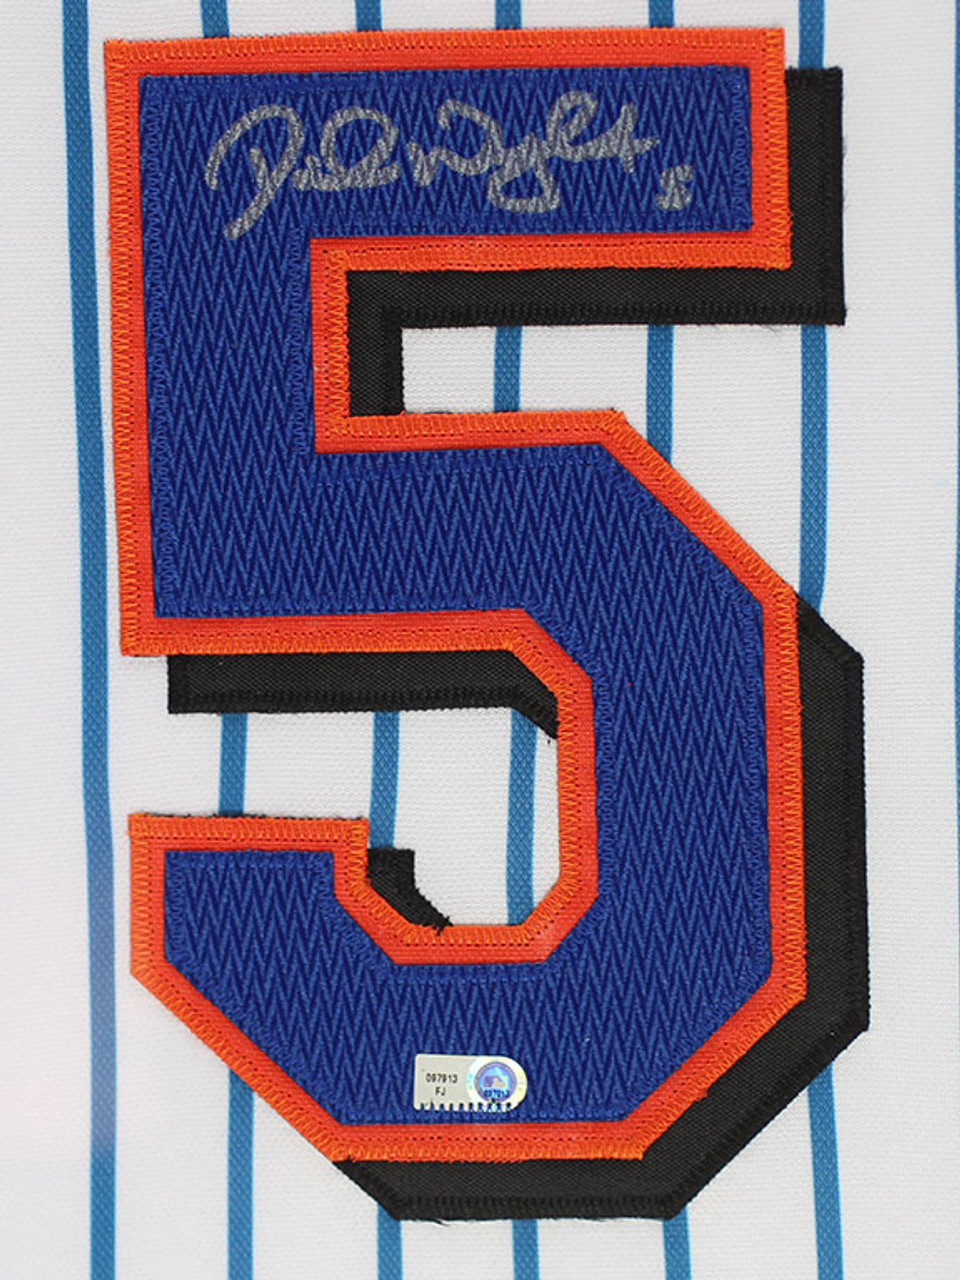 David Wright Autographed and Framed Pinstriped Mets Jersey Auto MLB COA D1-L